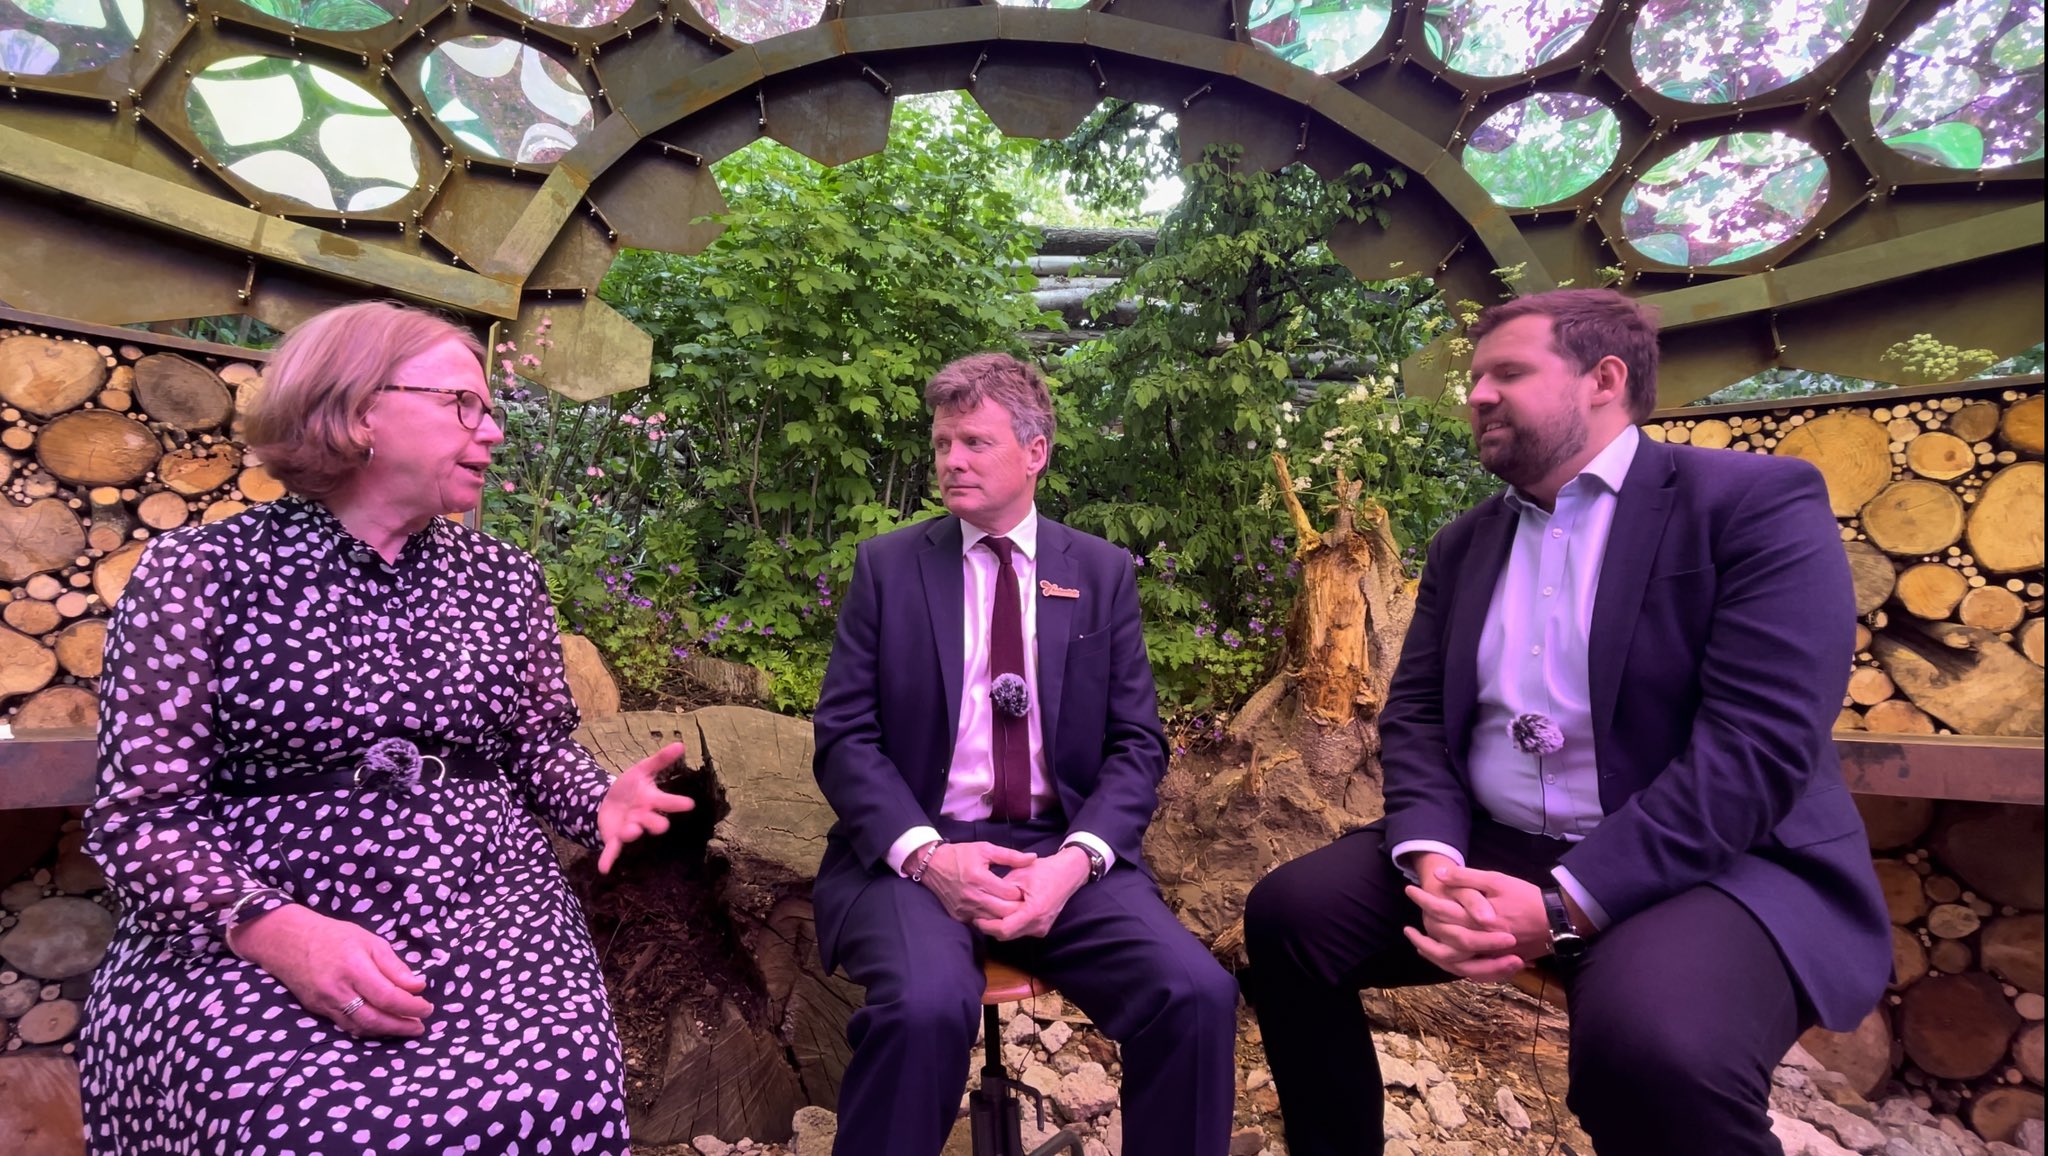 RES President Jane Hill with Minister for Biosecurity Richard Benyon and CEO of Curia UK, Ben Howlett  discussing their thoughts on sustainability and biodiversity in the RES Garden laboratory.